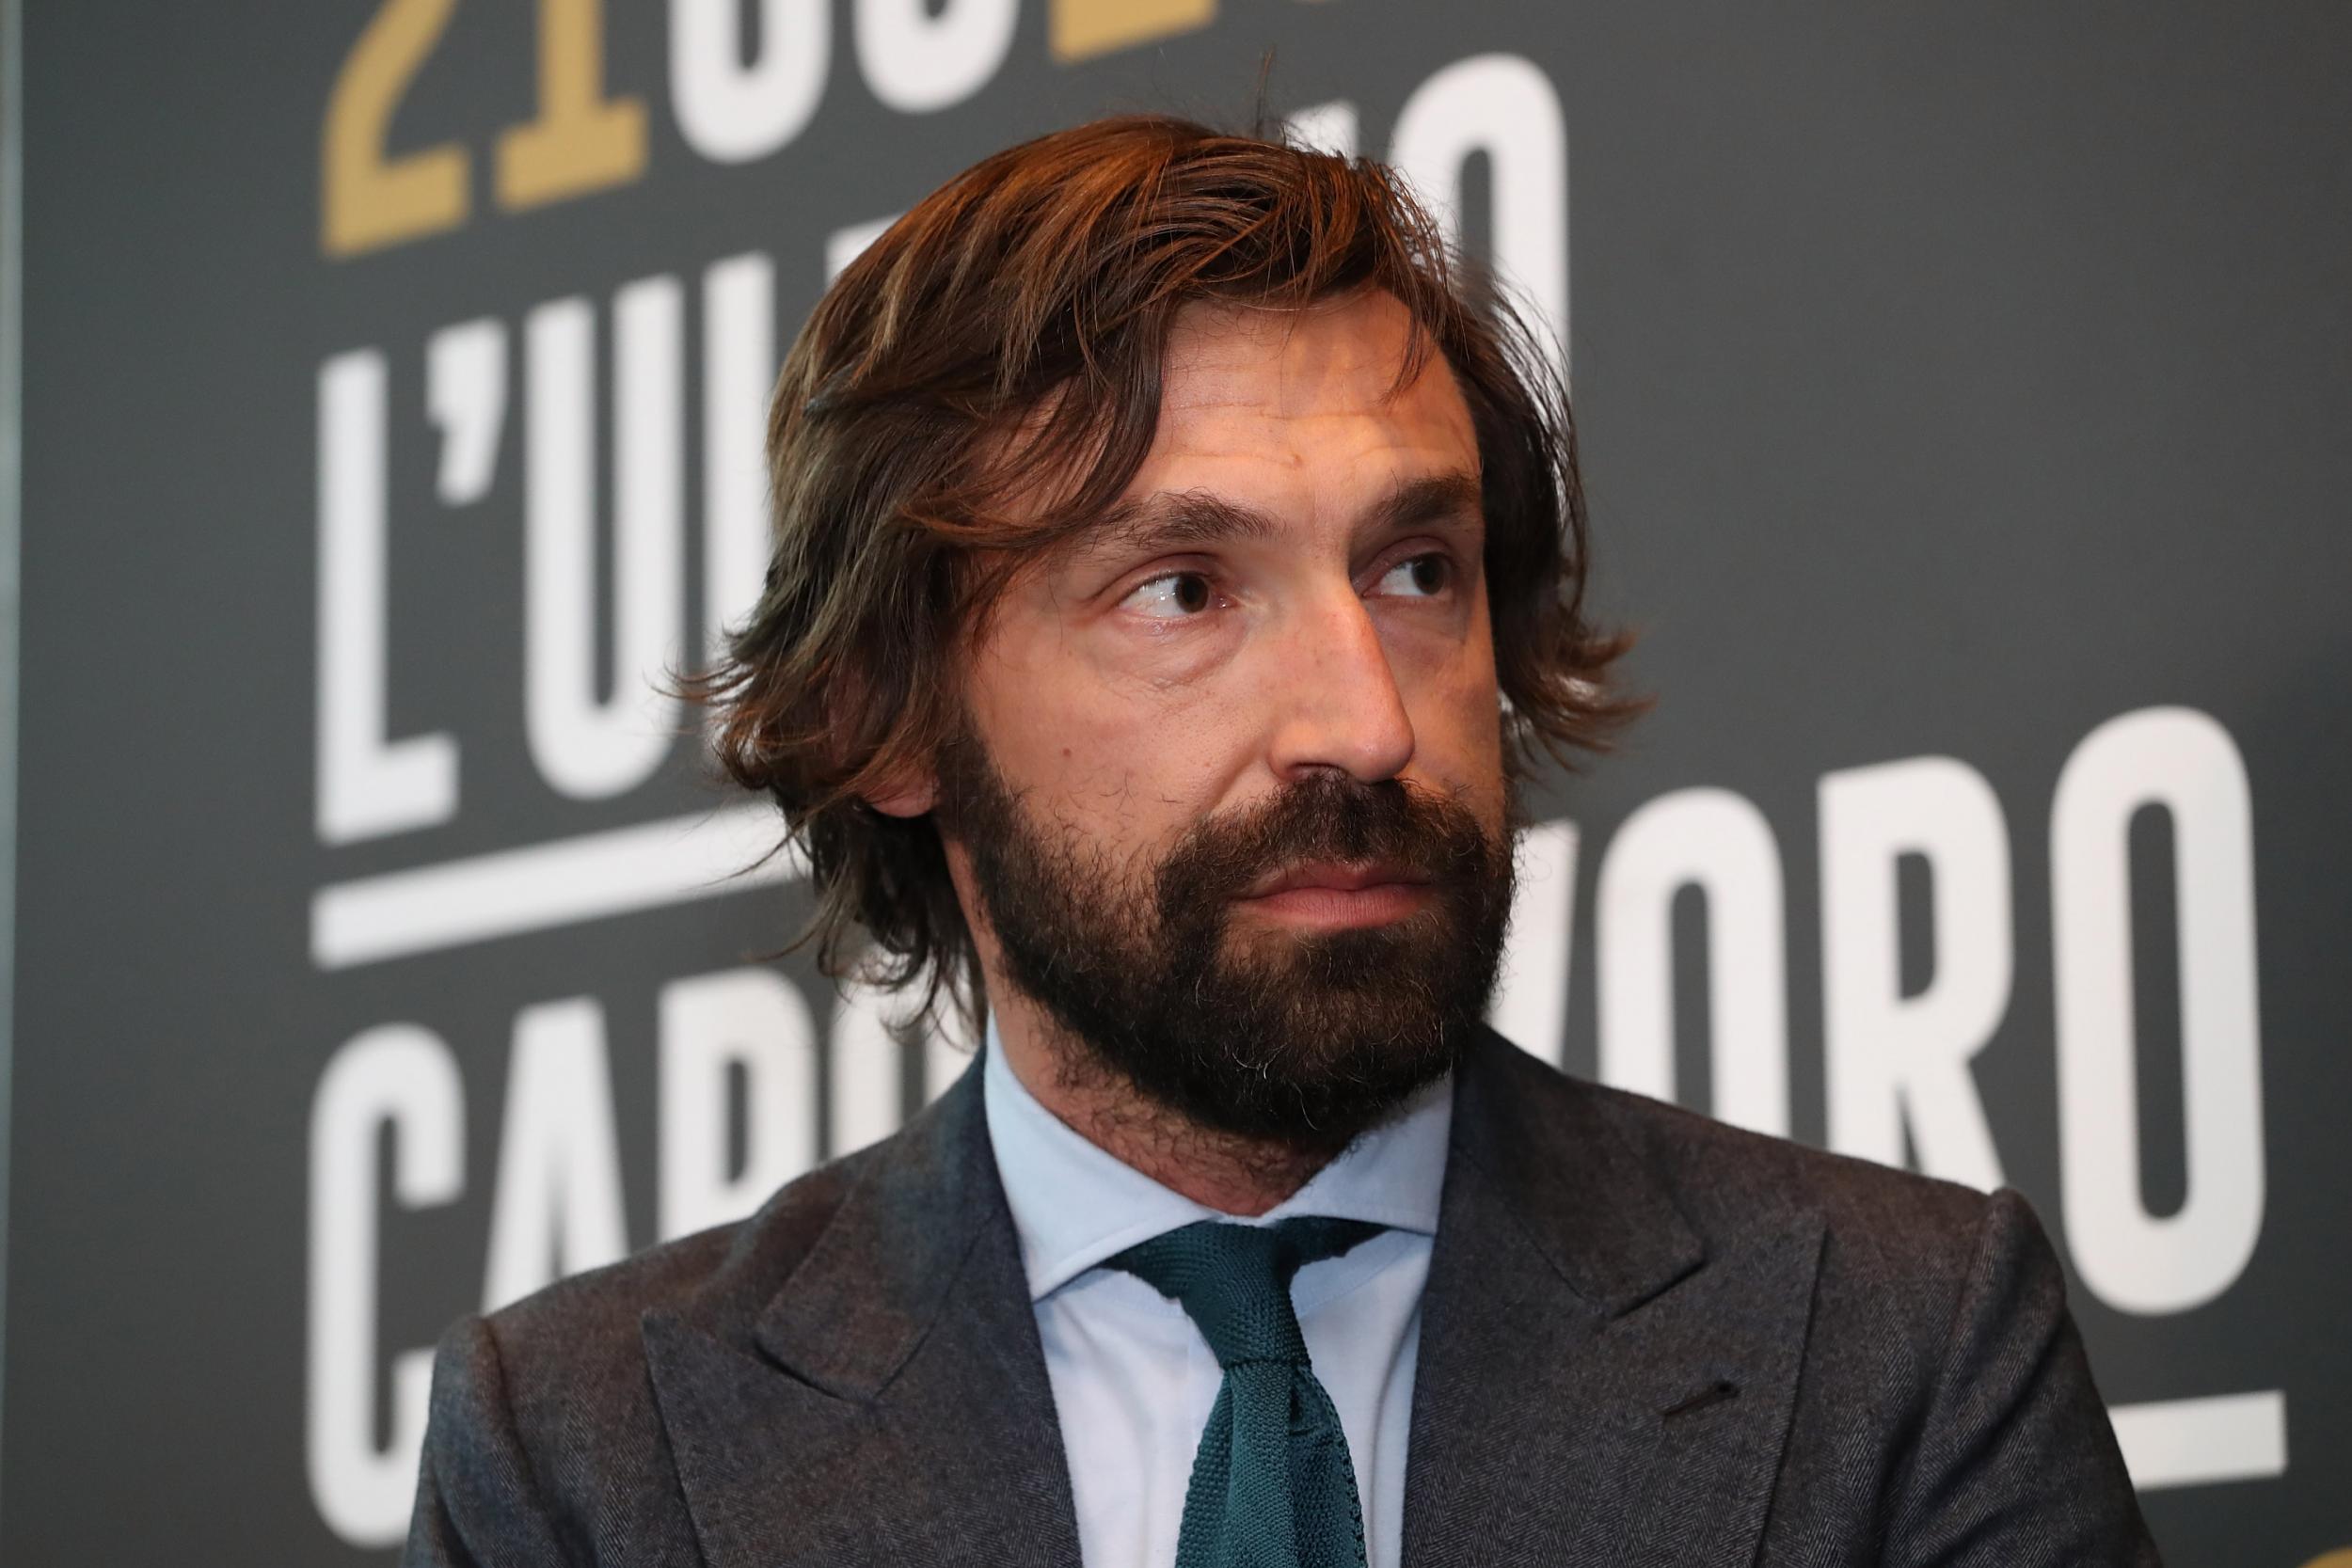 Andrea Pirlo has been appointed new Juventus head coach